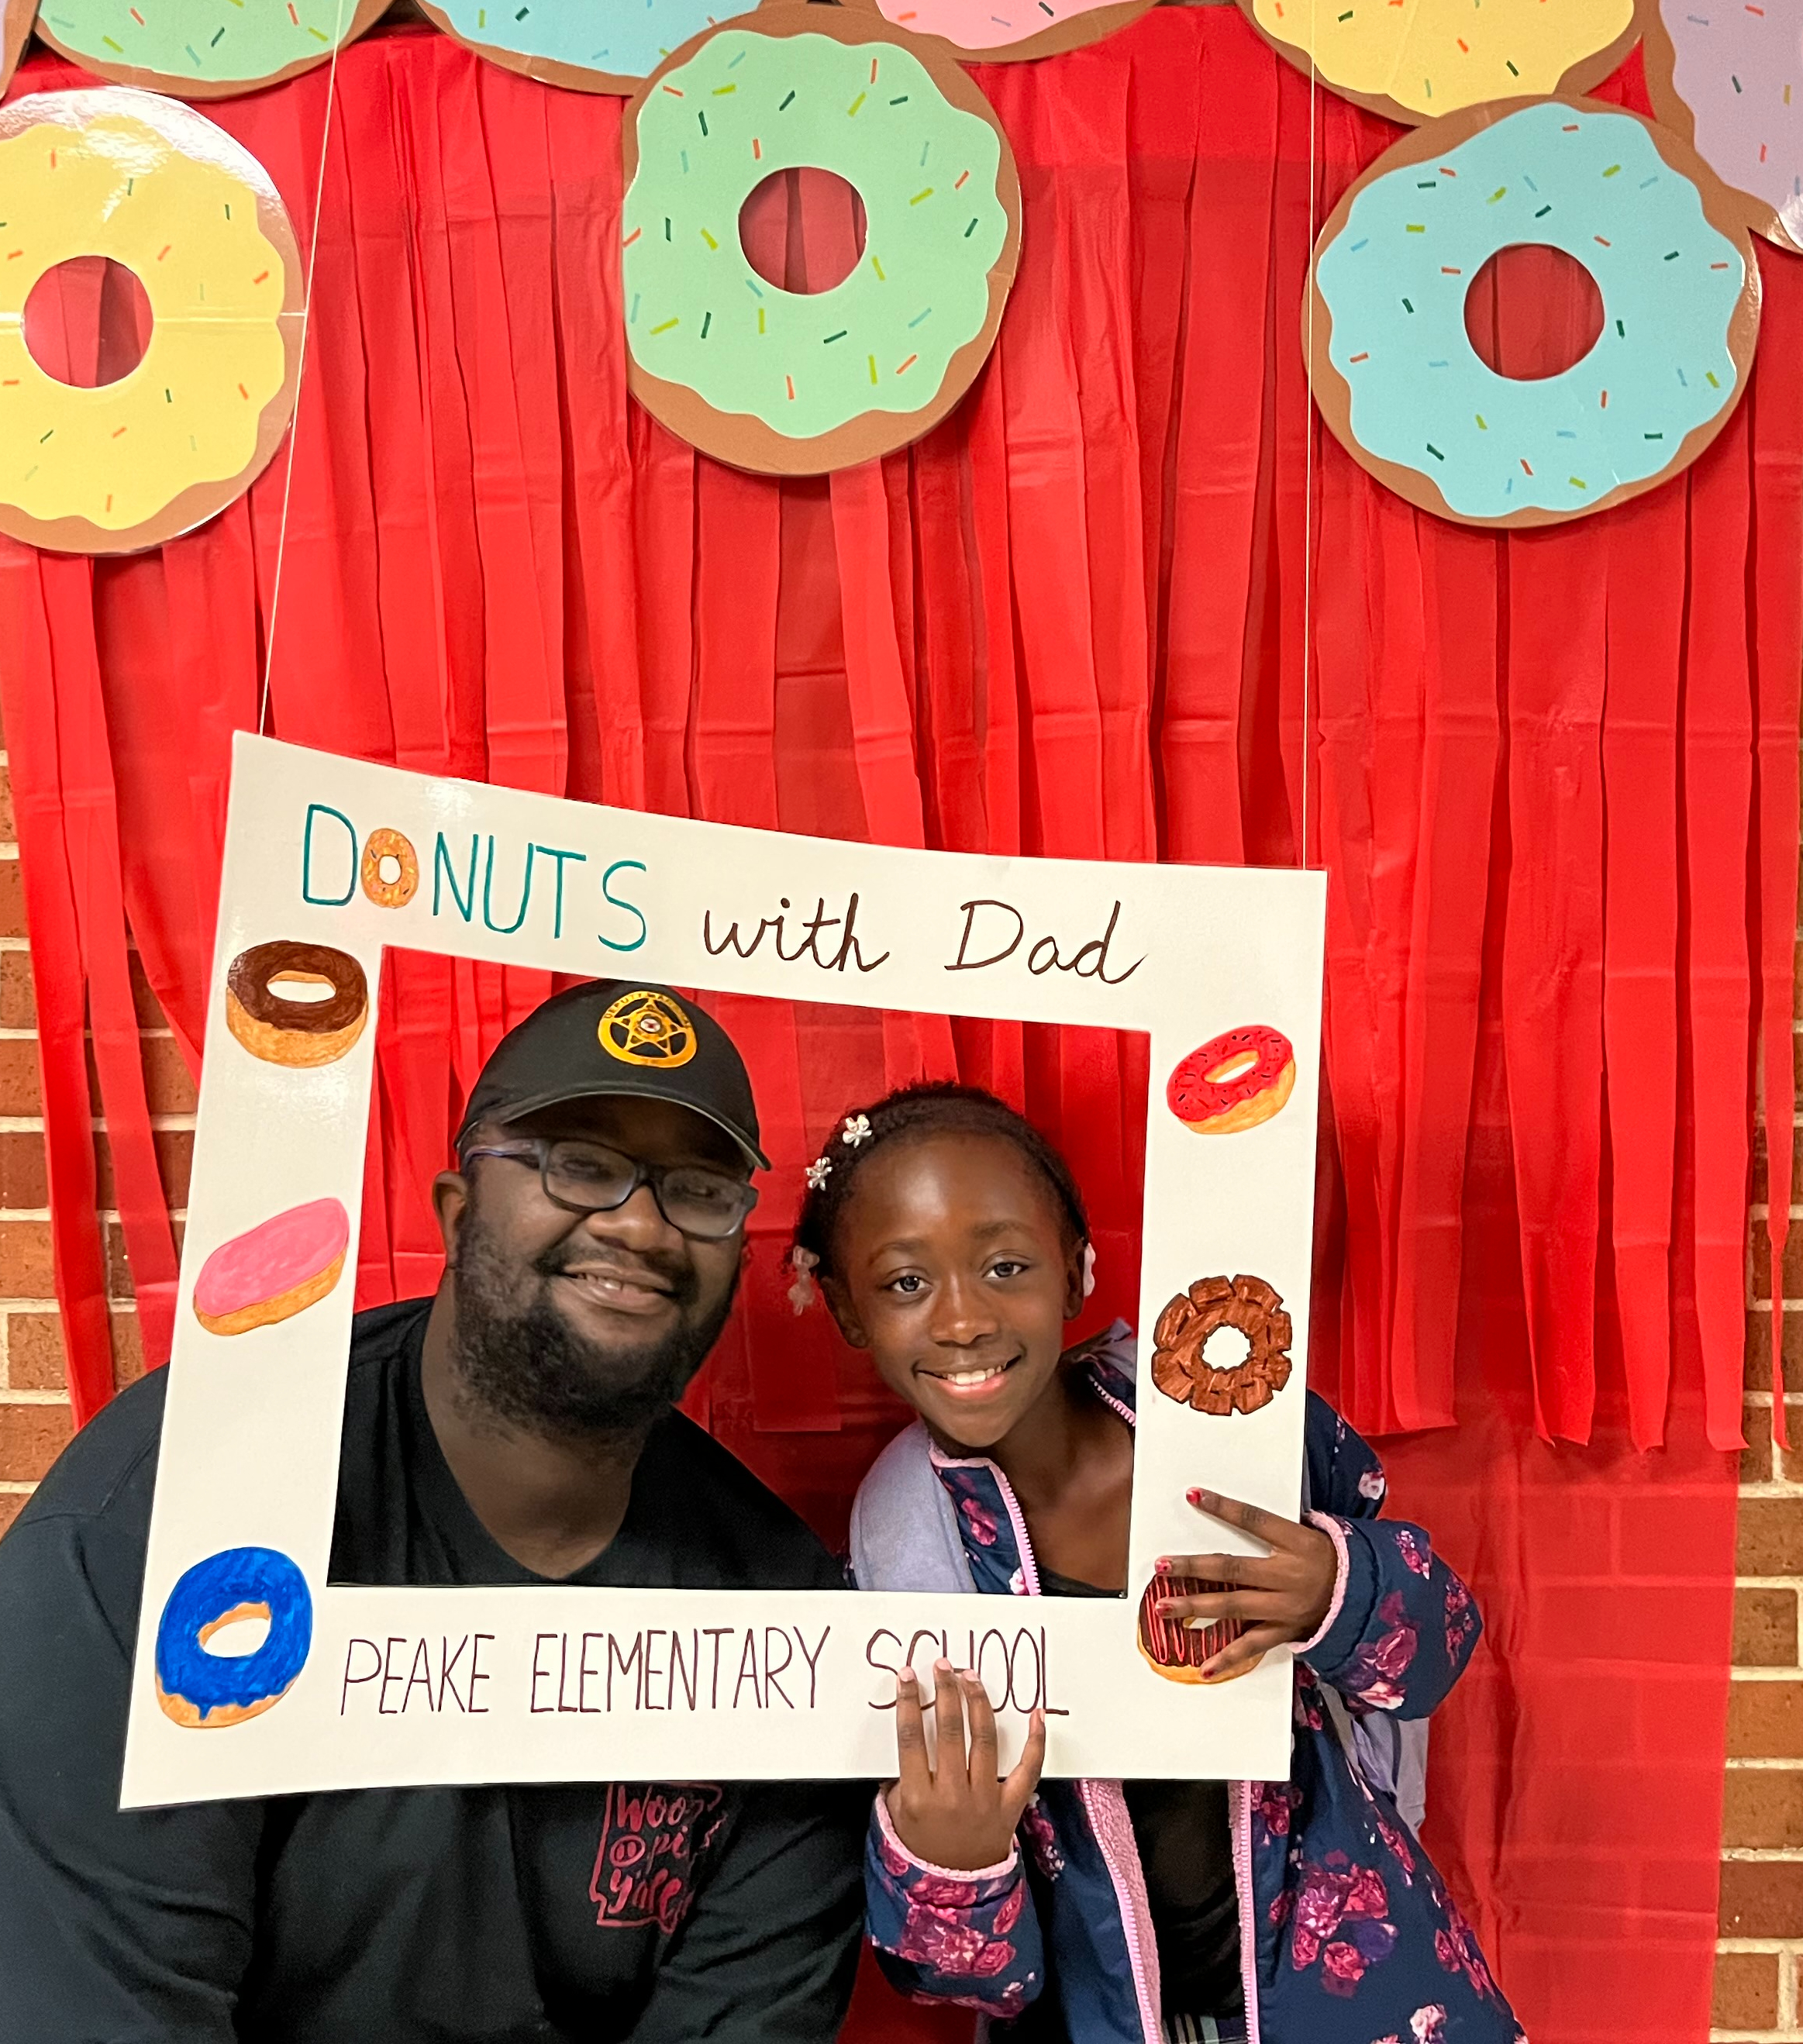 child and dad smiling in a picture frame that says "donuts with Dads"